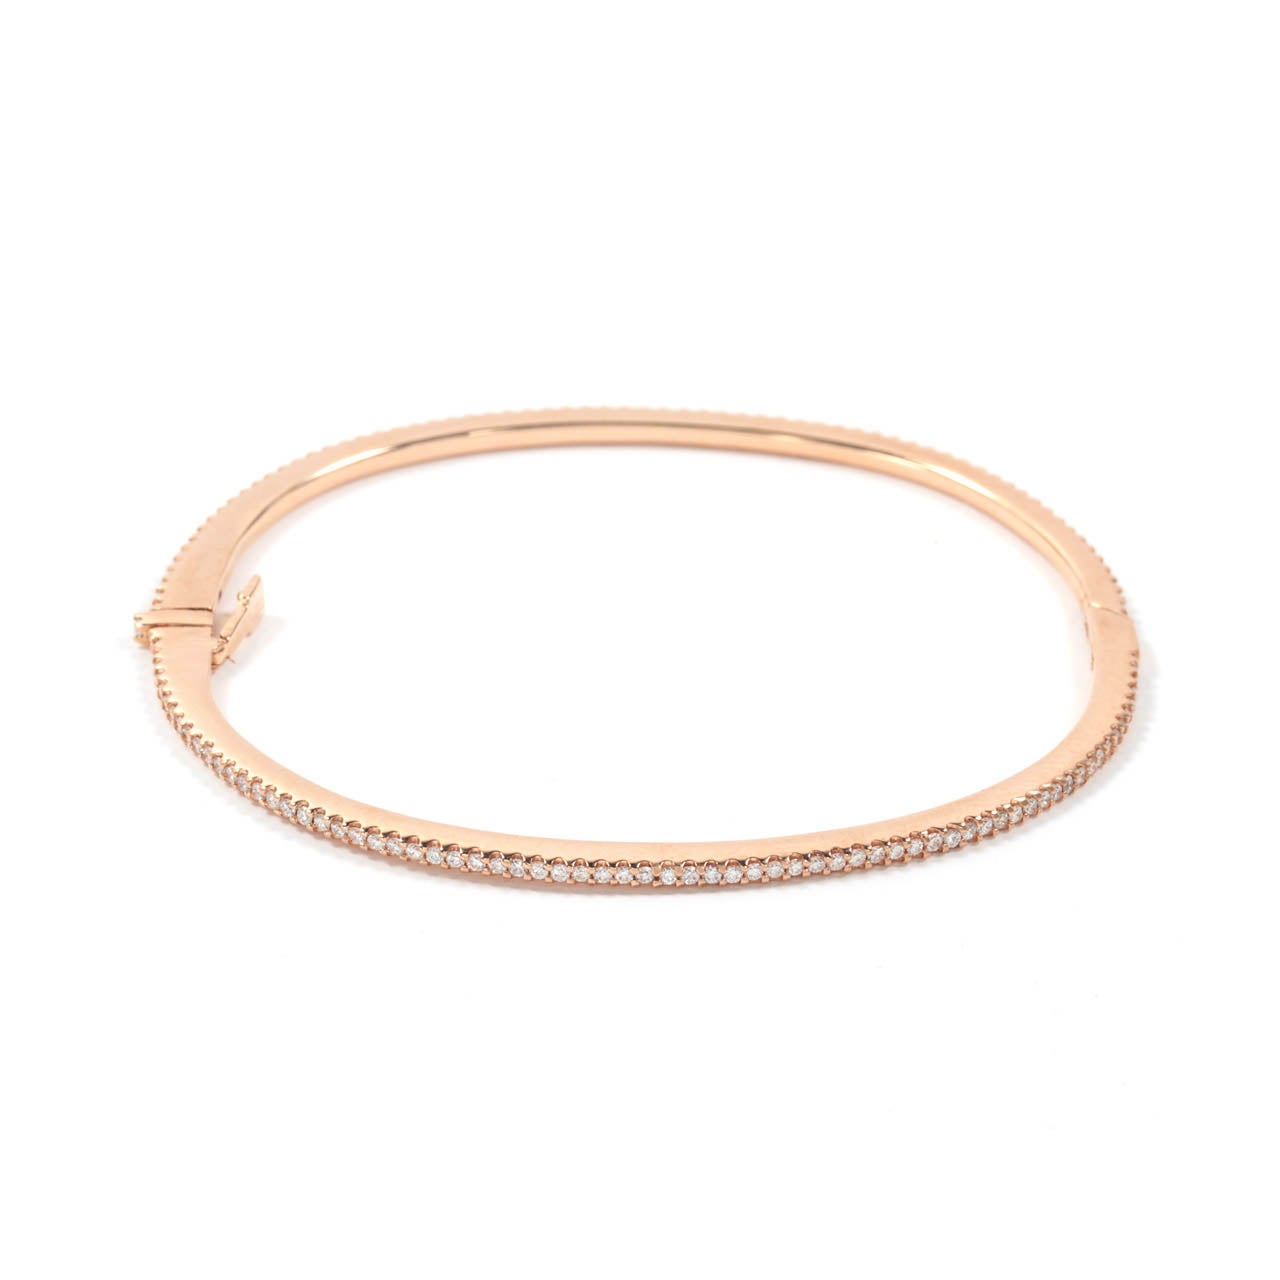 18kt Gold Bangles with Diamonds in rose gold, yellow gold, and white gold options.  Each bangle contains 1.00 carat of diamonds.

Sold individually, $3400 each.